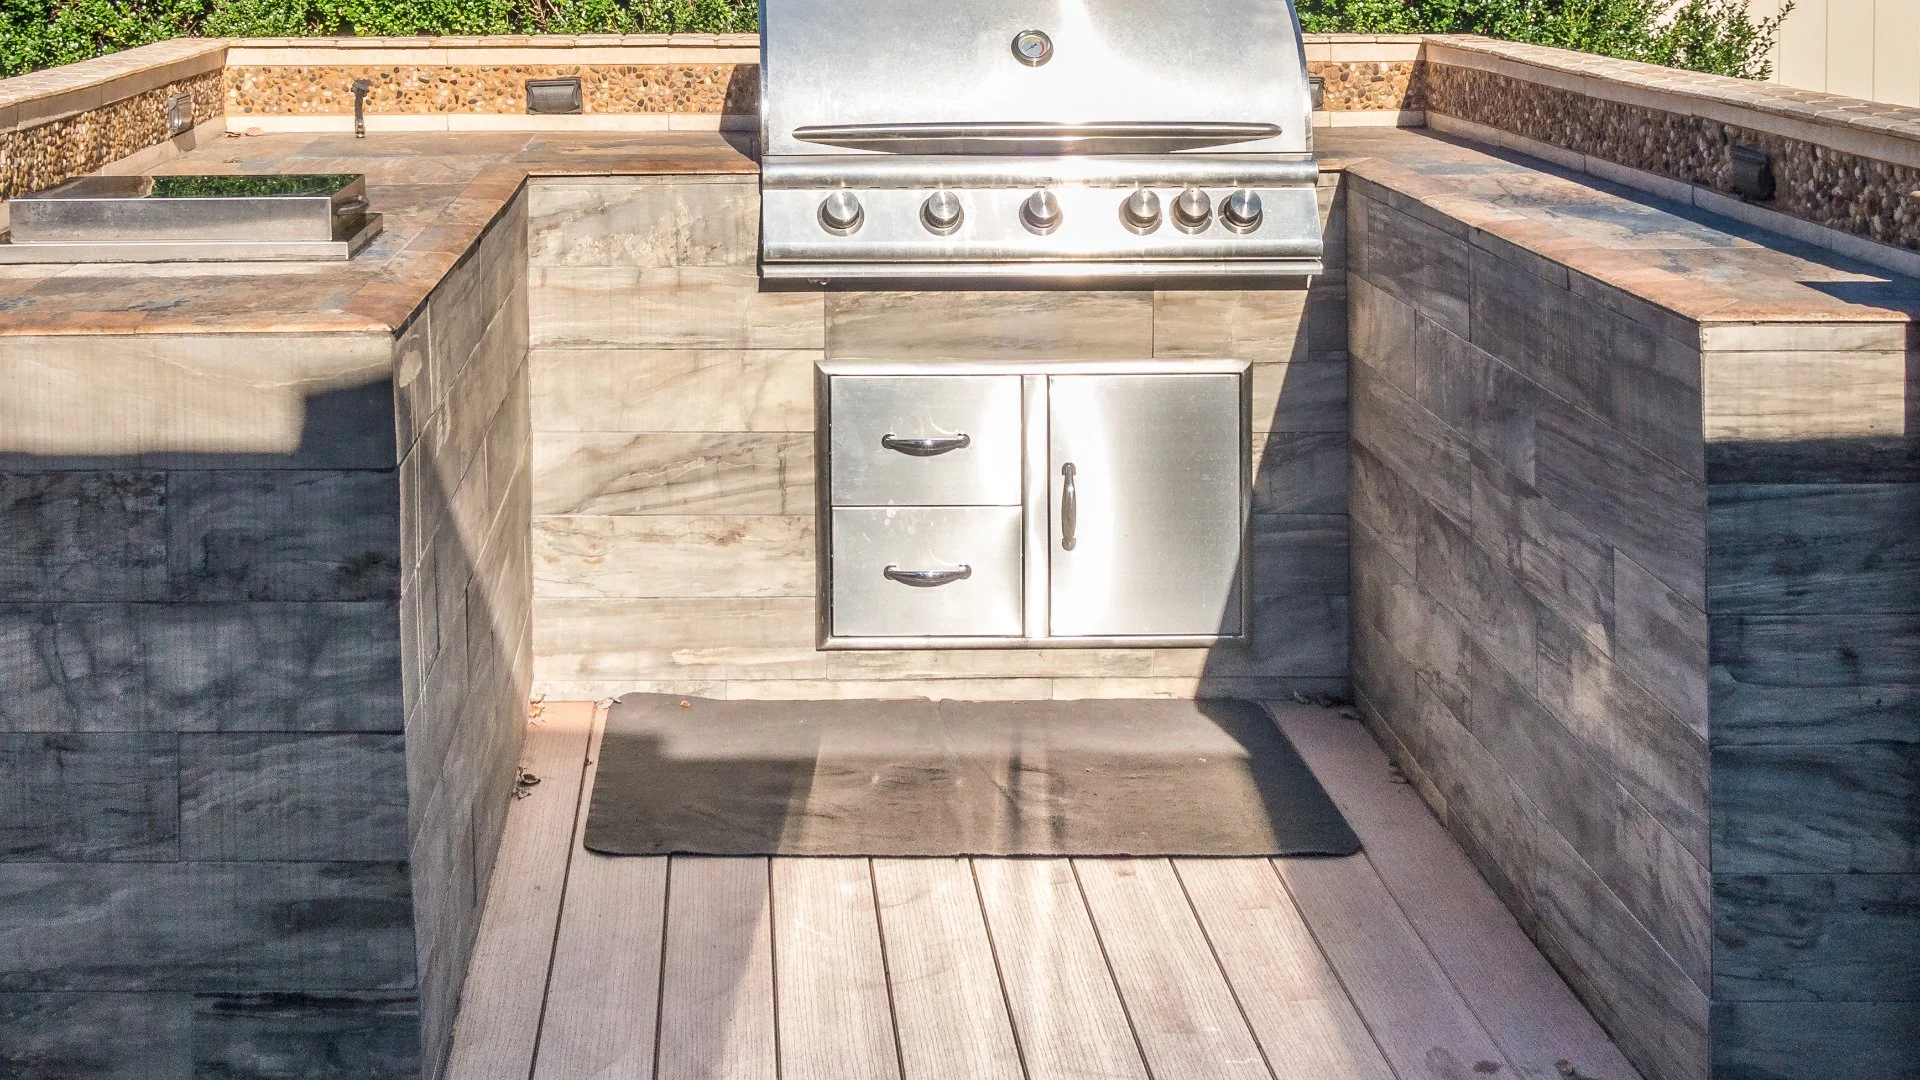 Is Adding an Outdoor Kitchen to My Property Worth It?